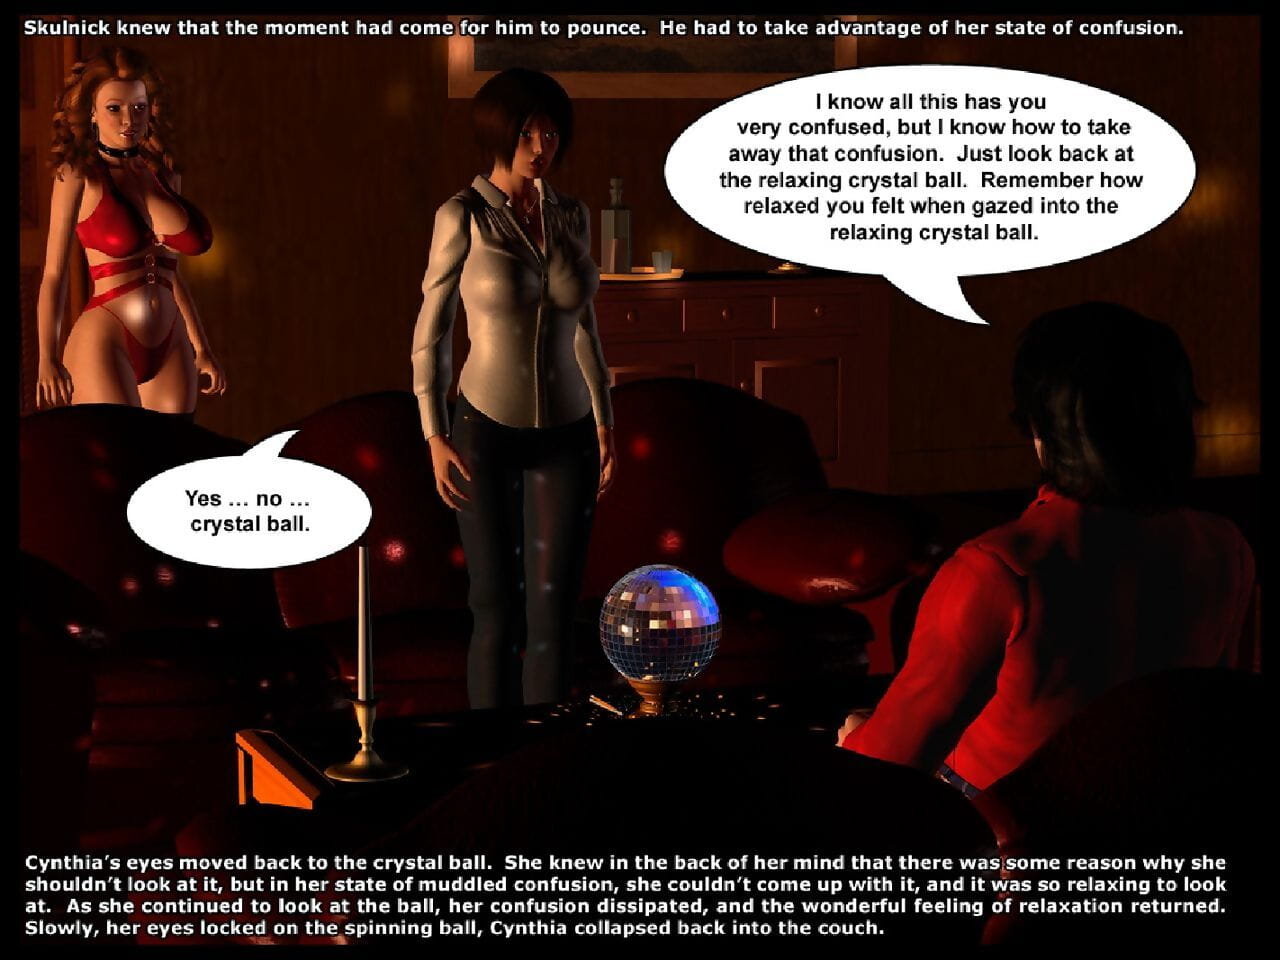 Debunking Hypnosis - part 2 page 1